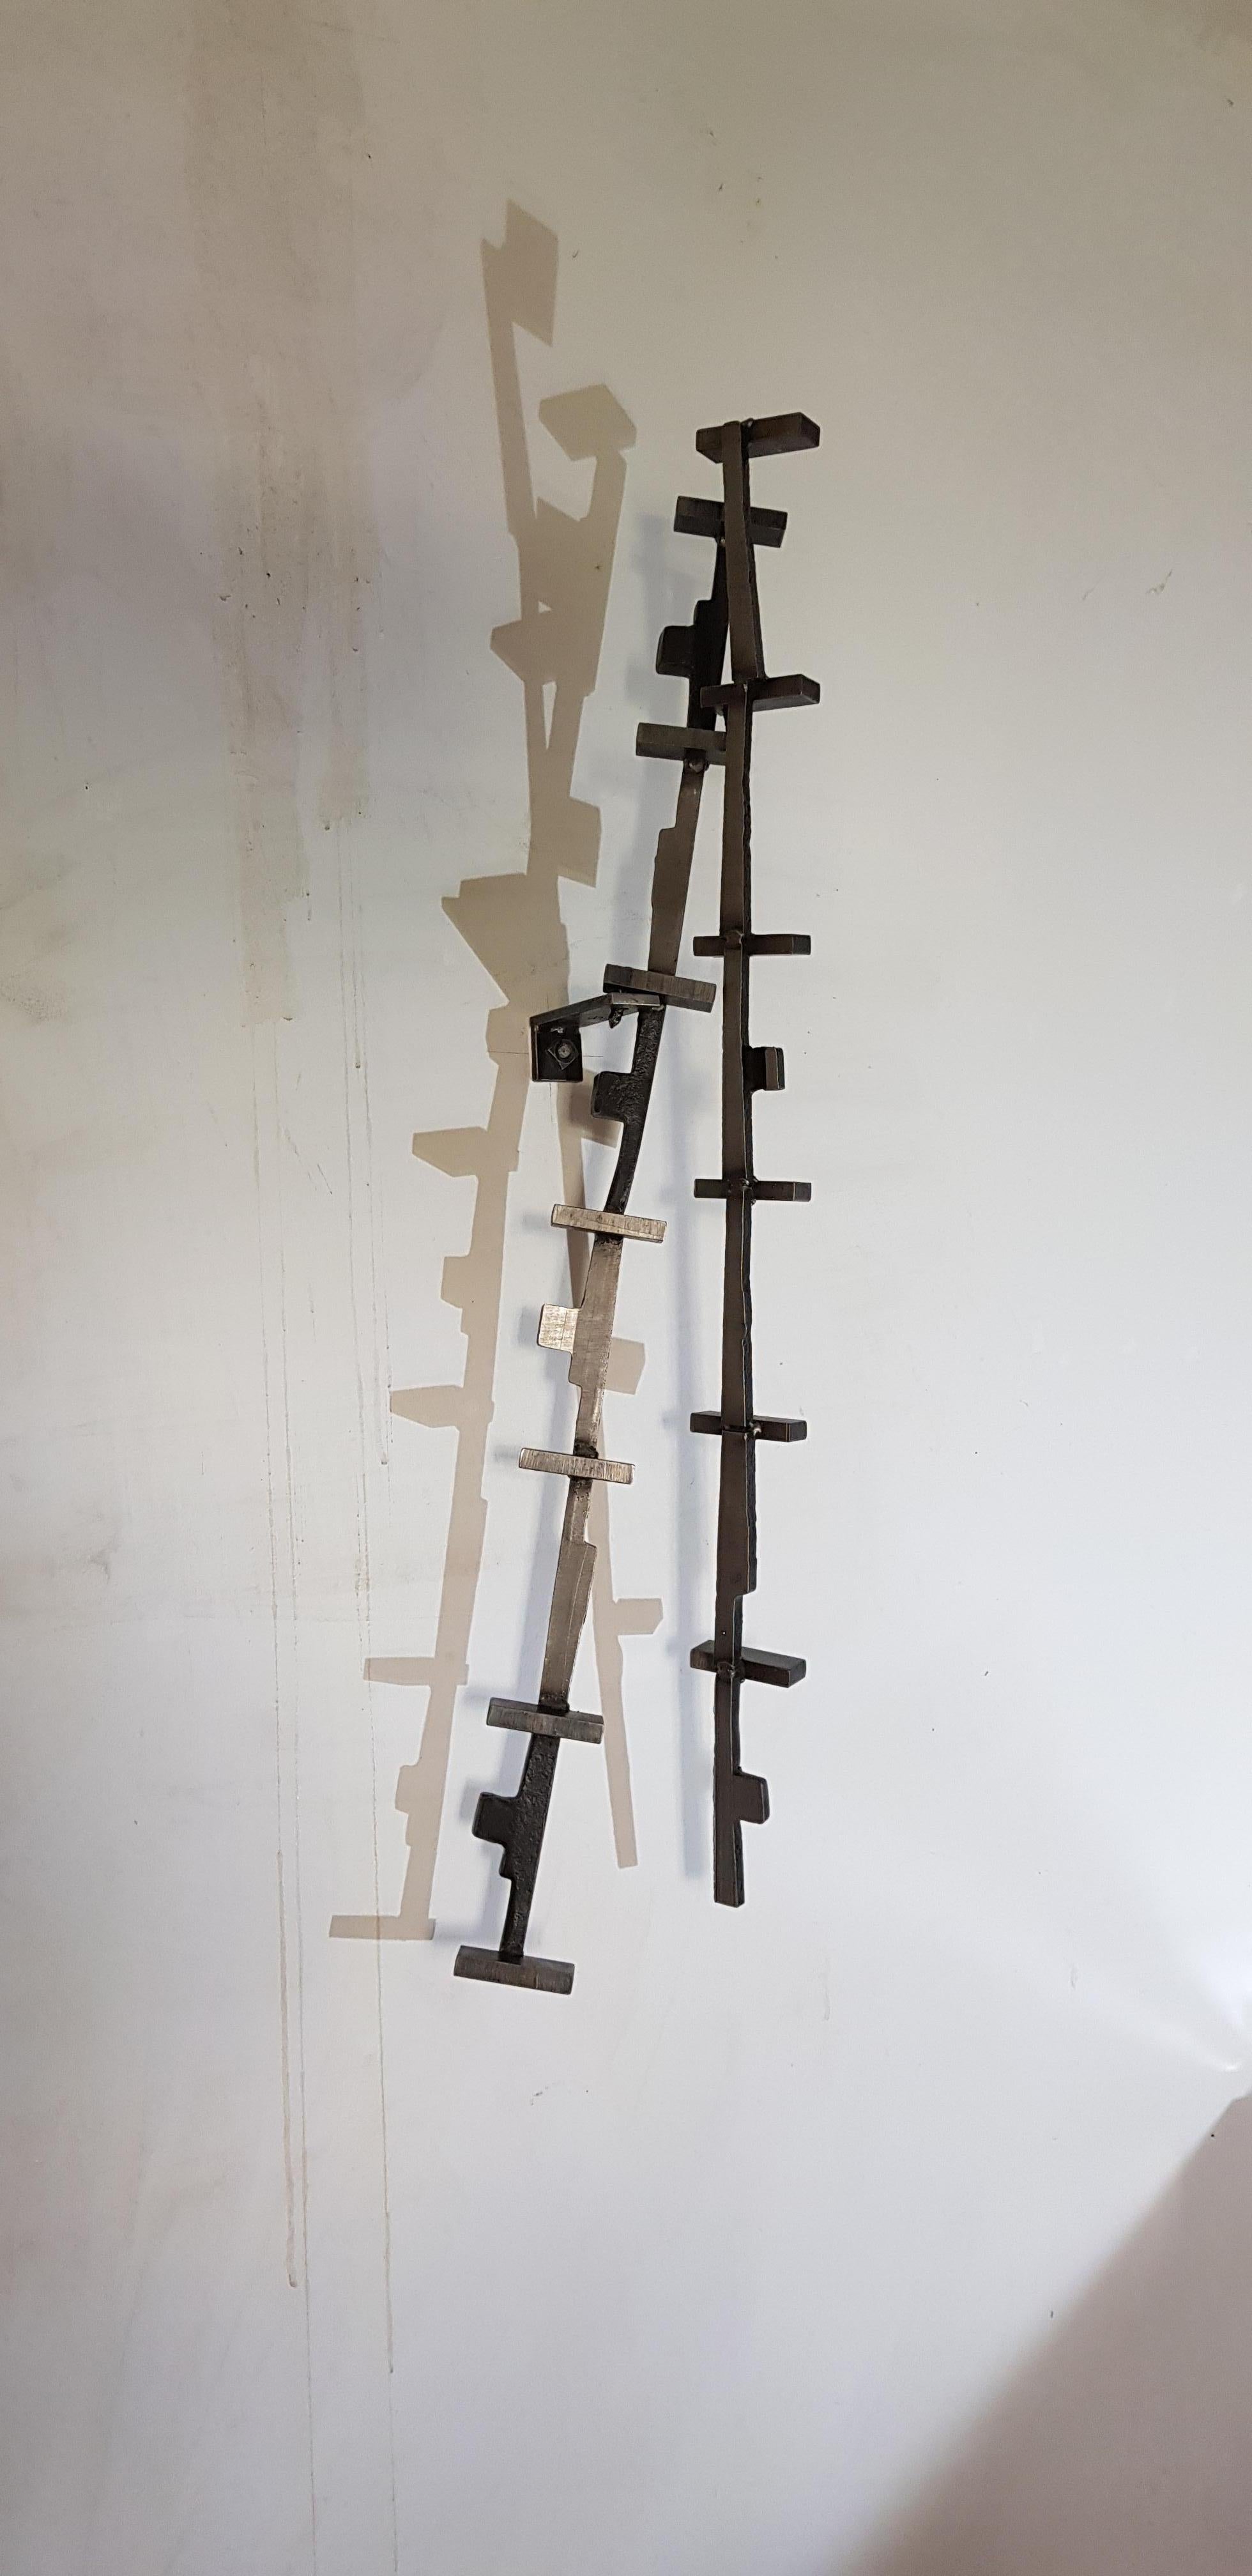 Marcus Centmayer - "Kinetic Series - The Pendulum 01/23".

"The Pendulum" kinetic sculpture made of steel, cut, welded, brushed.
Using small iron (= railway fittings) that the artist found and collected while working on his premises:
"With the